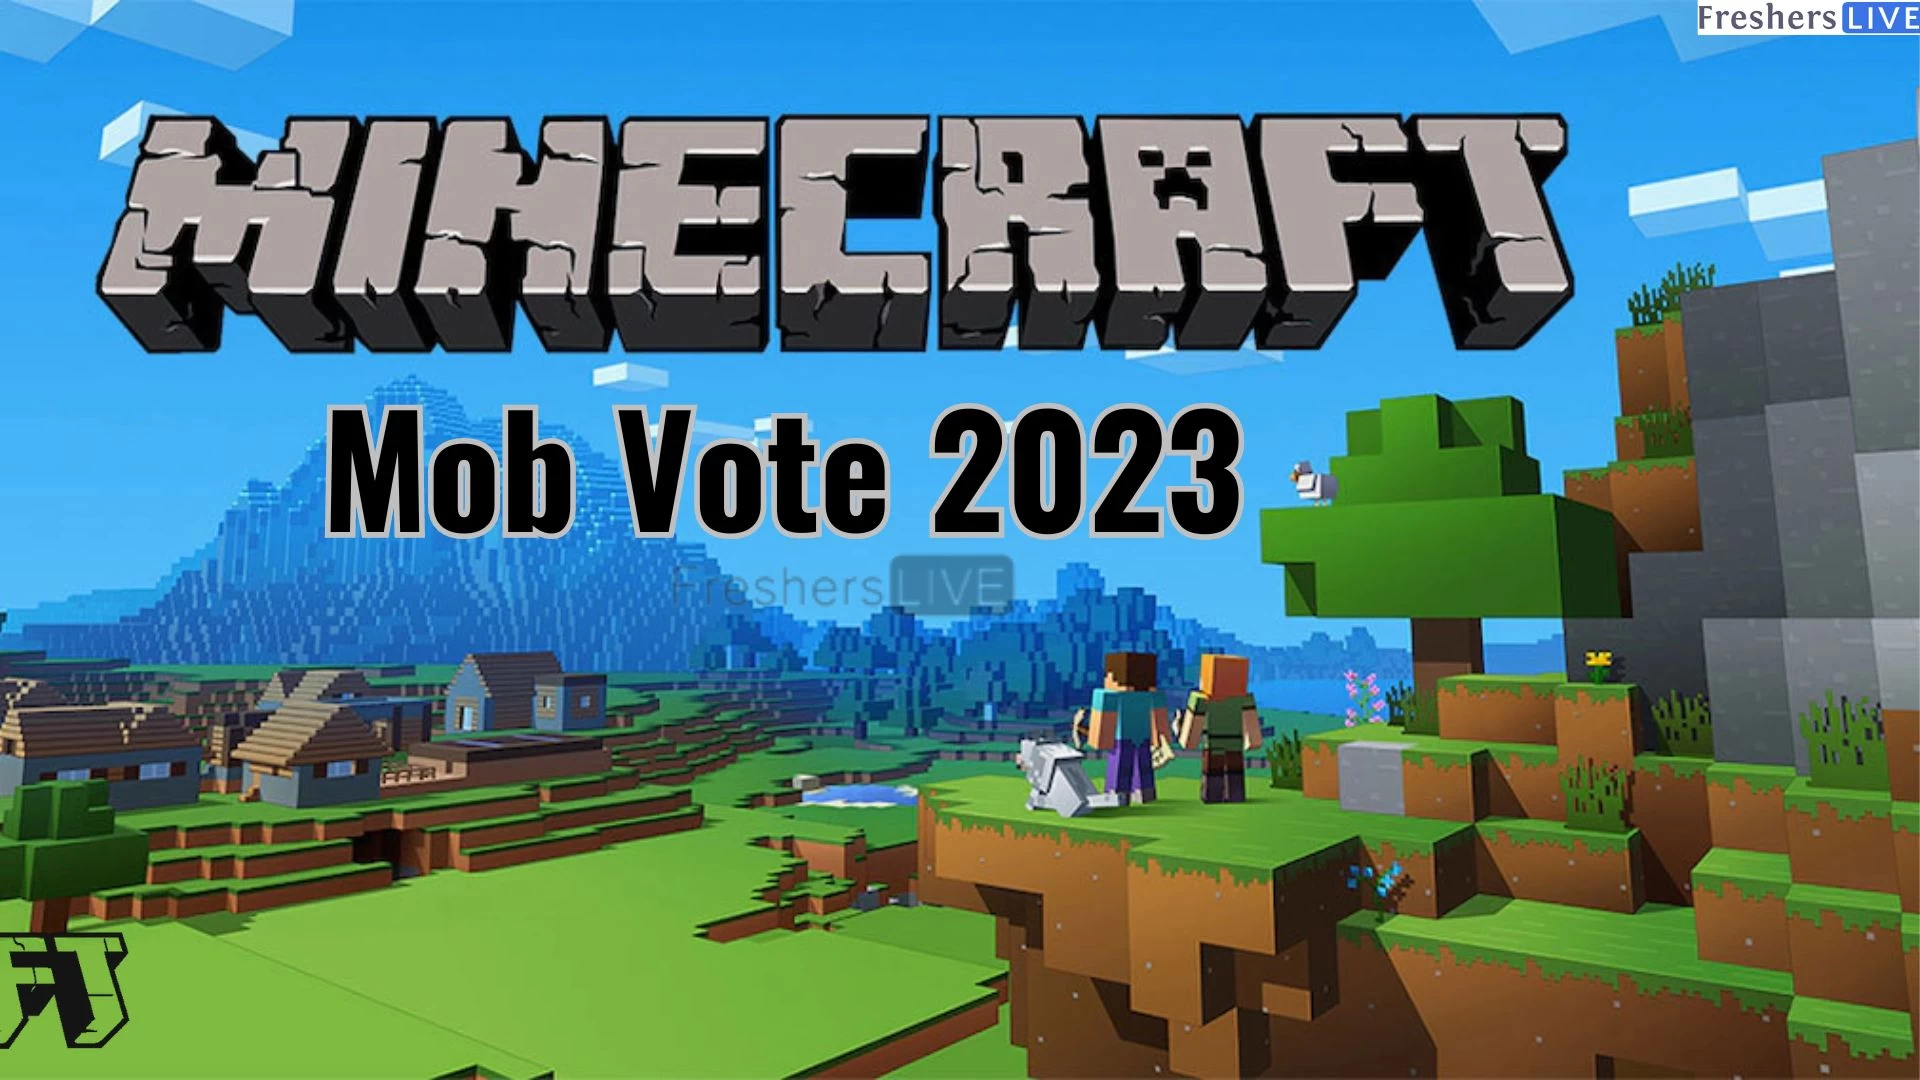 Minecraft Mob Vote 2023: How to Vote Minecraft Mob 2023? Where to Vote for Minecraft Mob 2023?